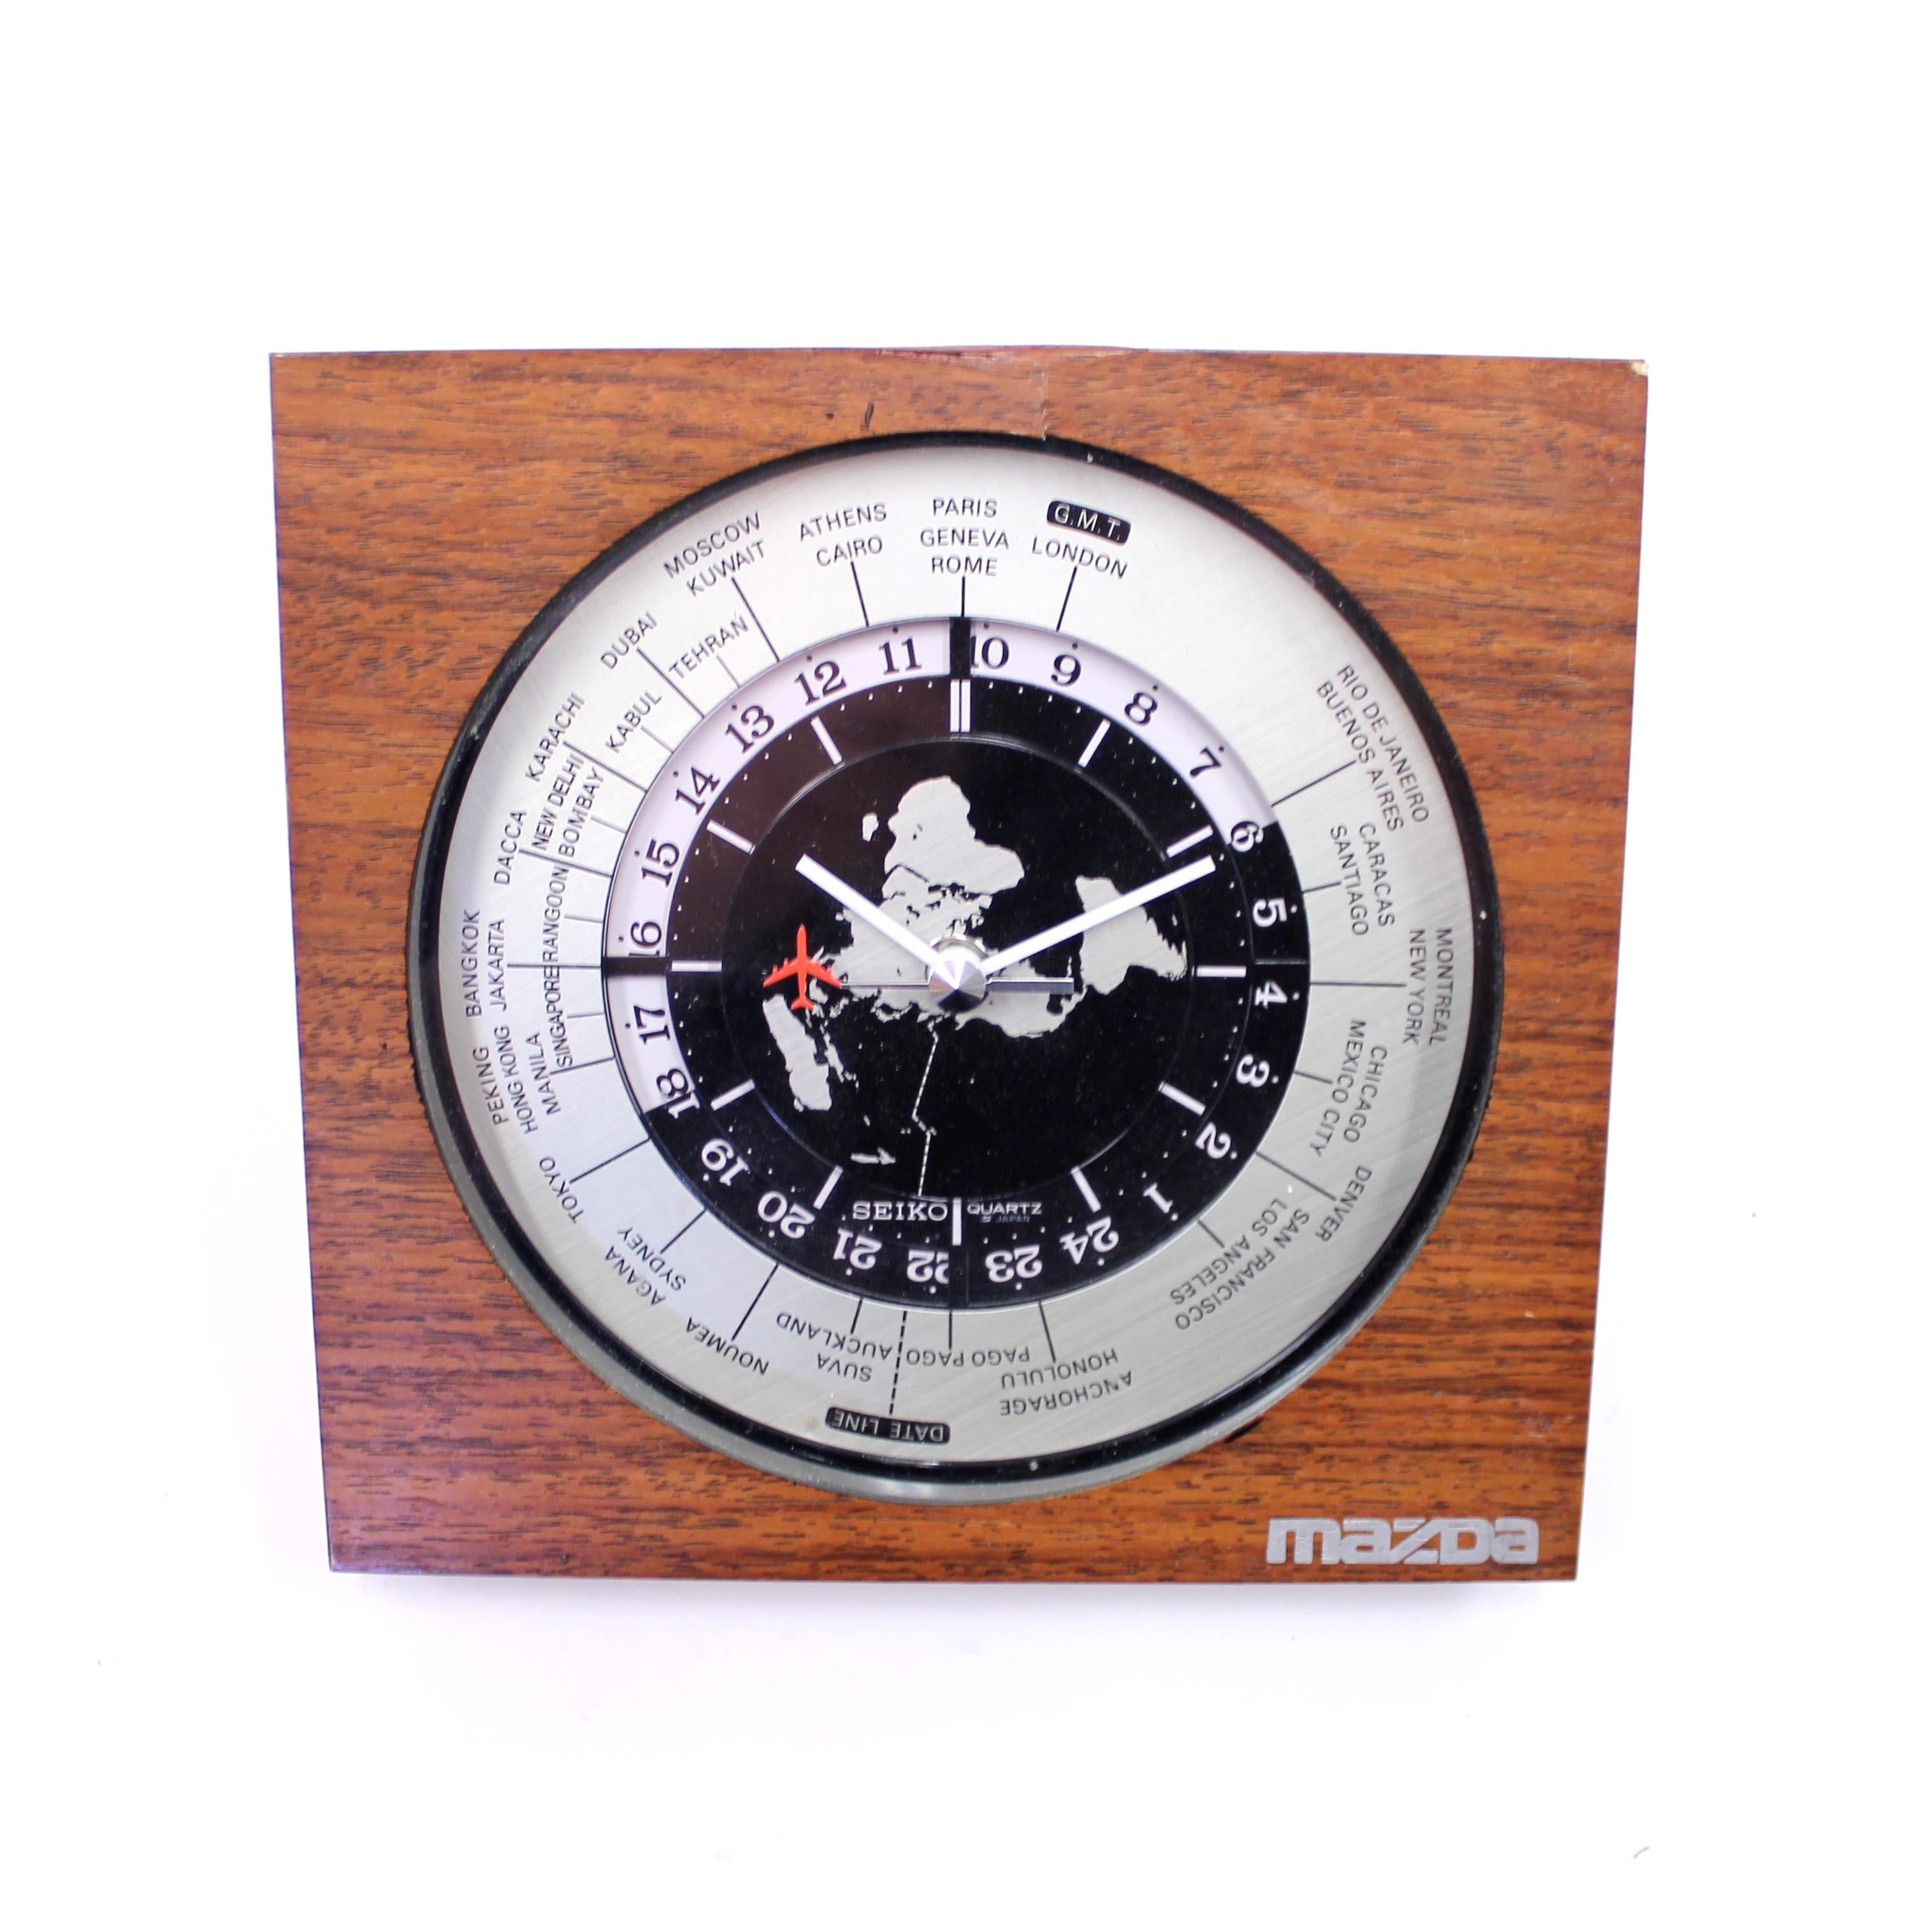 Seiko world timer GMT tilted desk or table clock with a sweeping seconds with a red aeroplane seconds hand and quartz movement from the 1980s. Case made of walnut veneer. This example from a Mazda dealership. Good untouched vintage condition with a